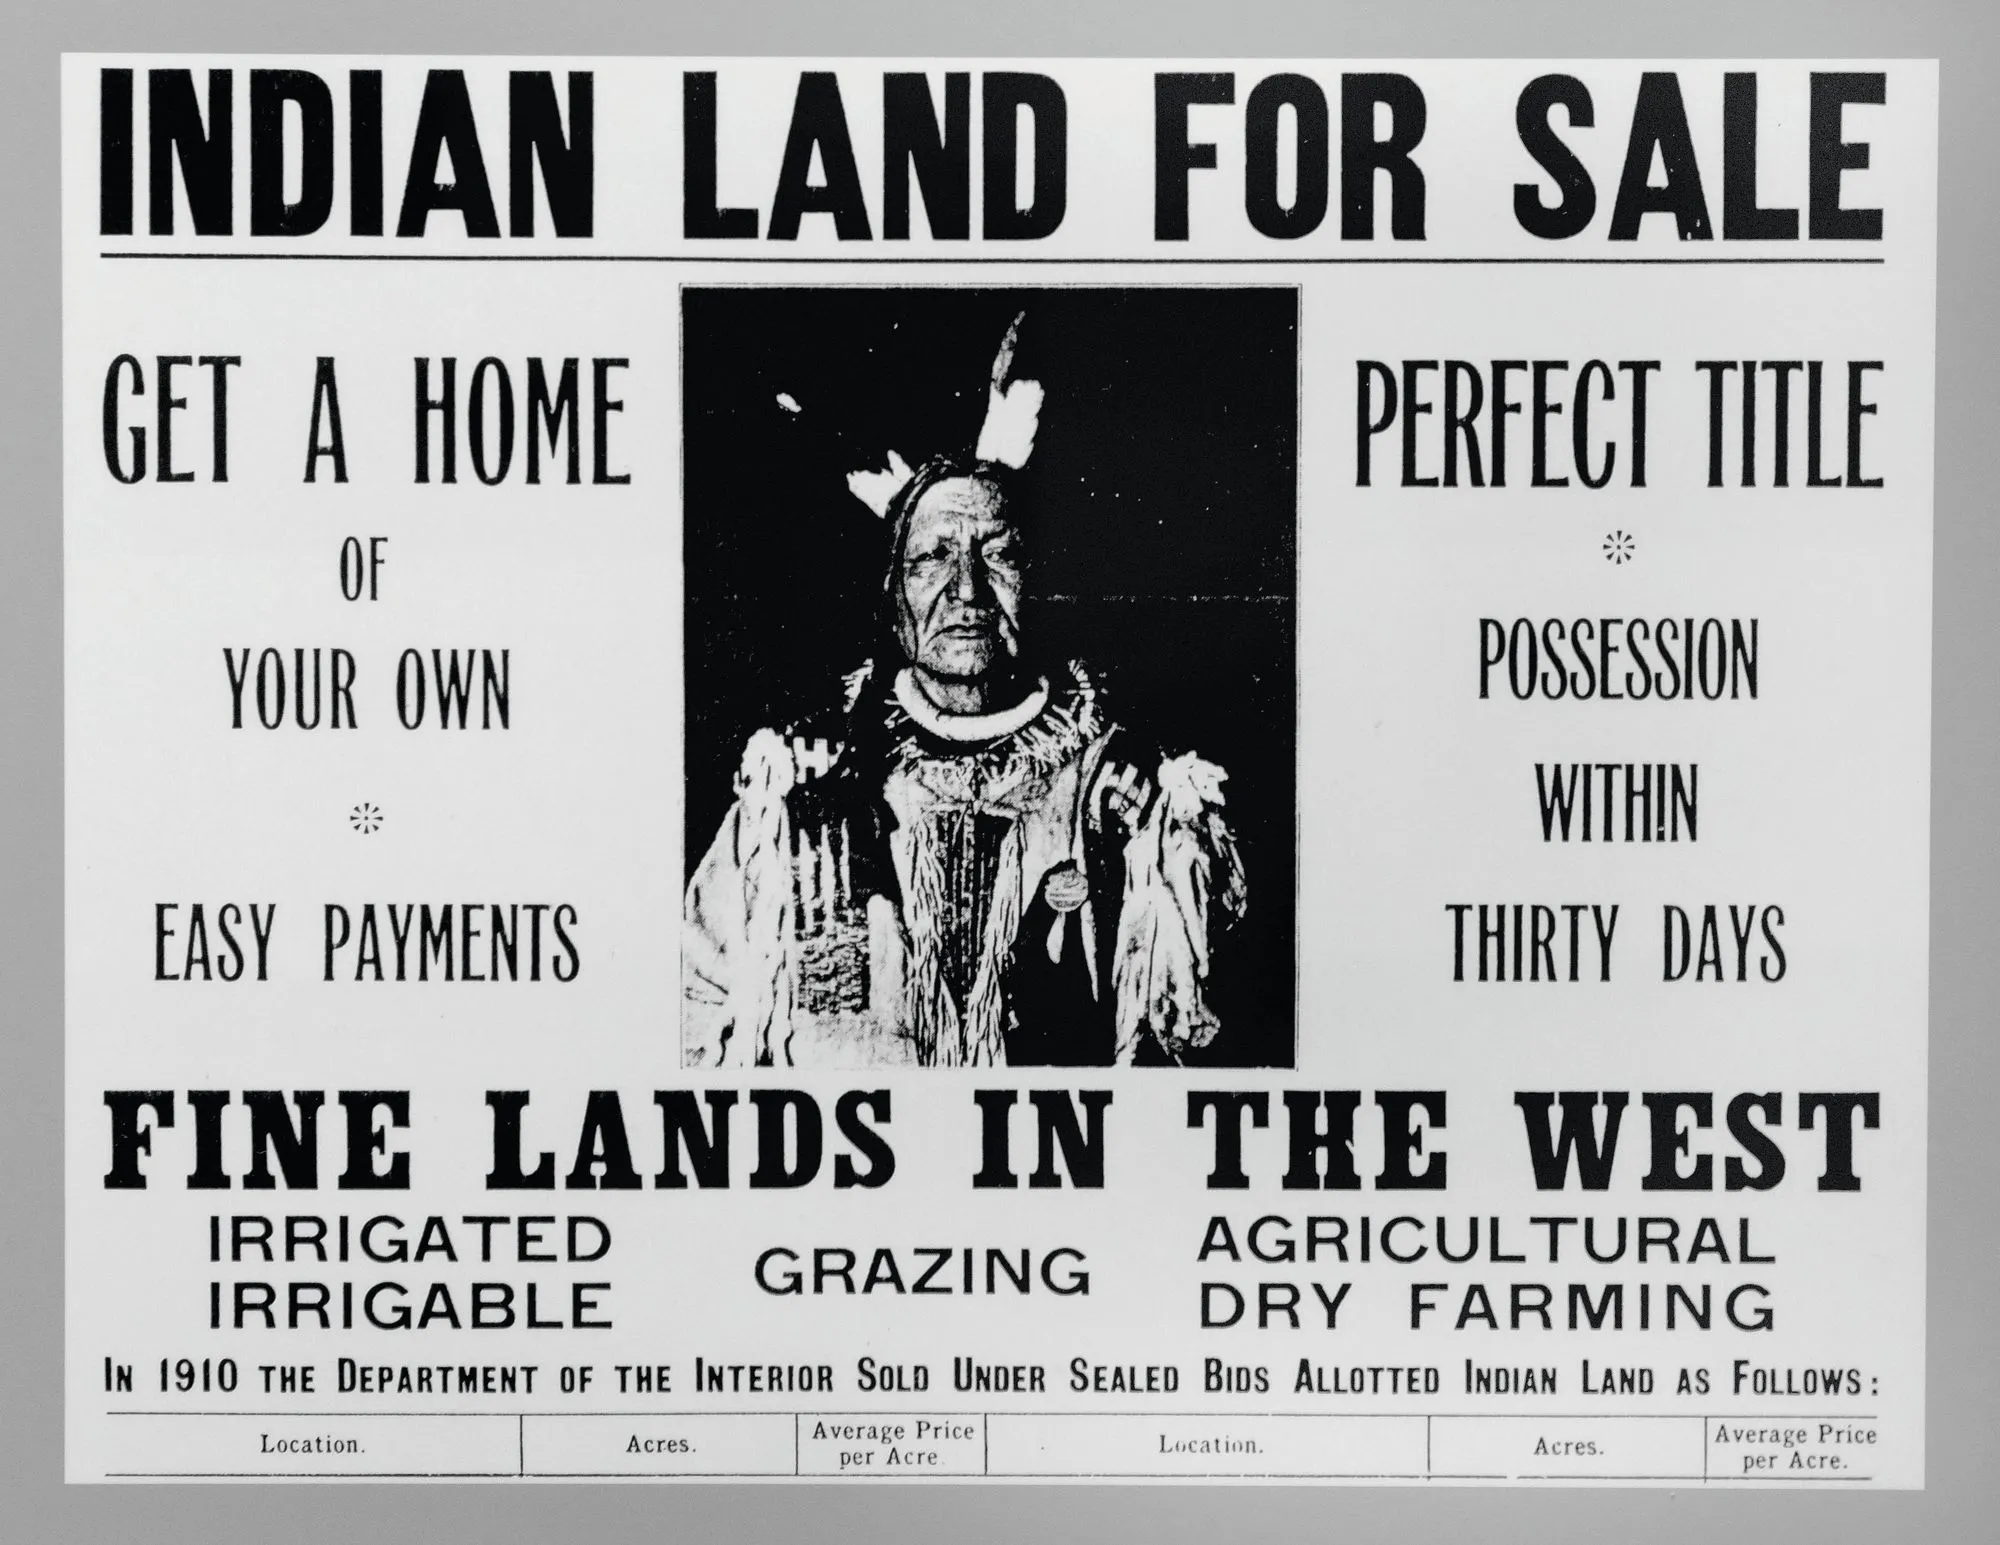 Vintage Indian Land For Sale poster, USA, around 1911